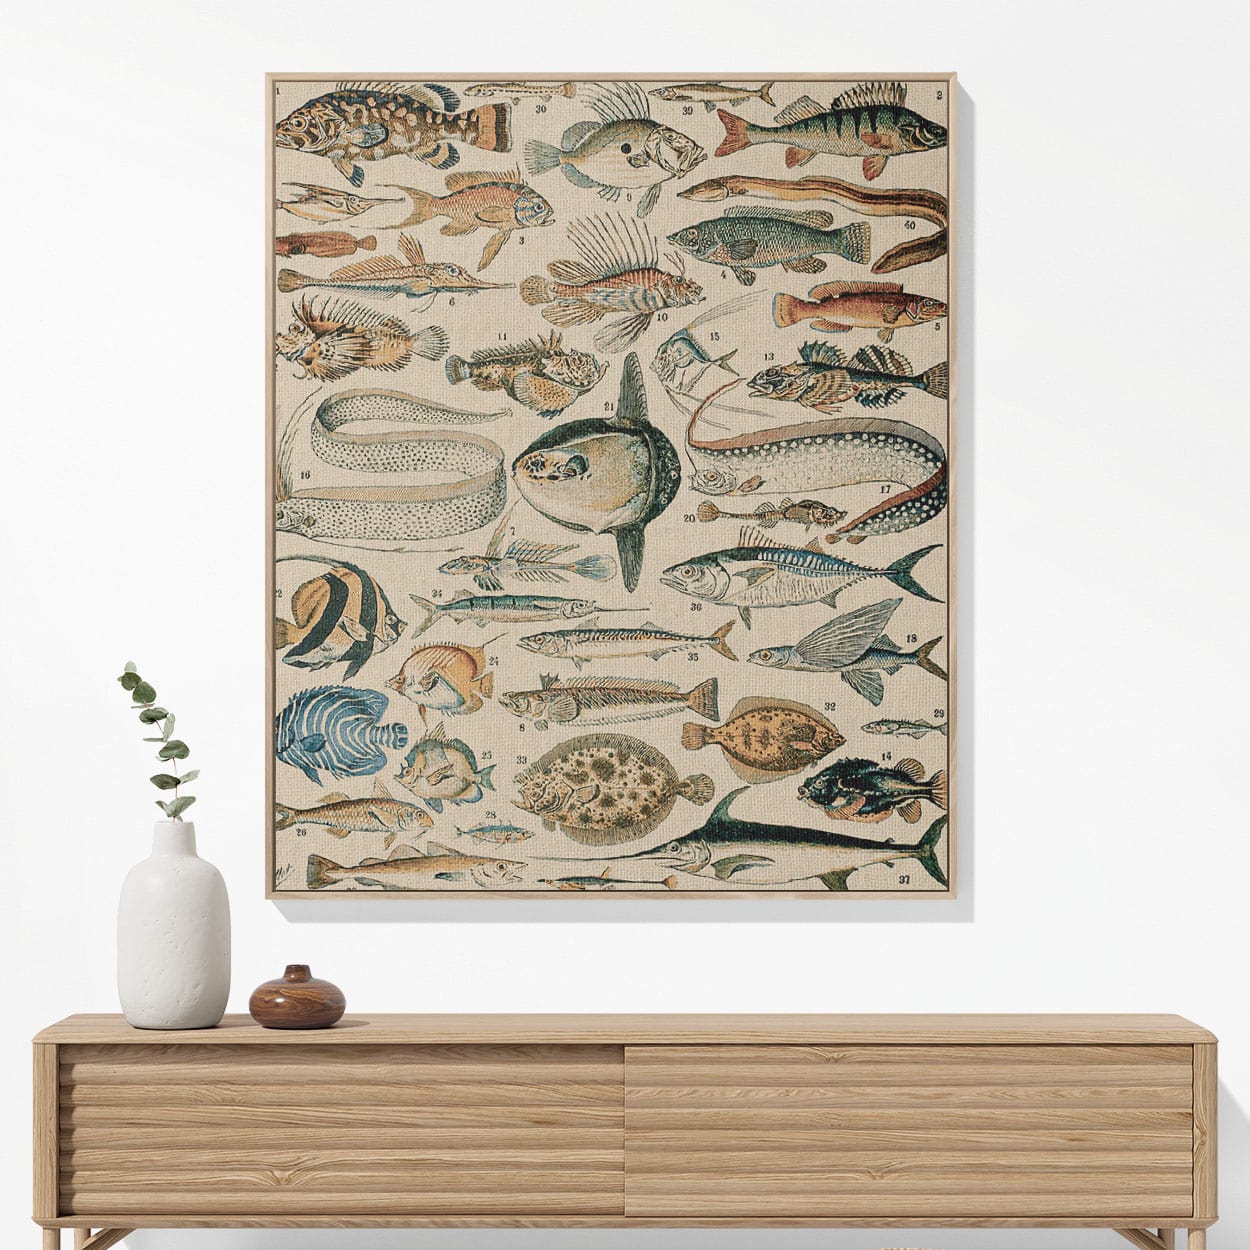 Fishing Woven Blanket Woven Blanket Hanging on a Wall as Framed Wall Art